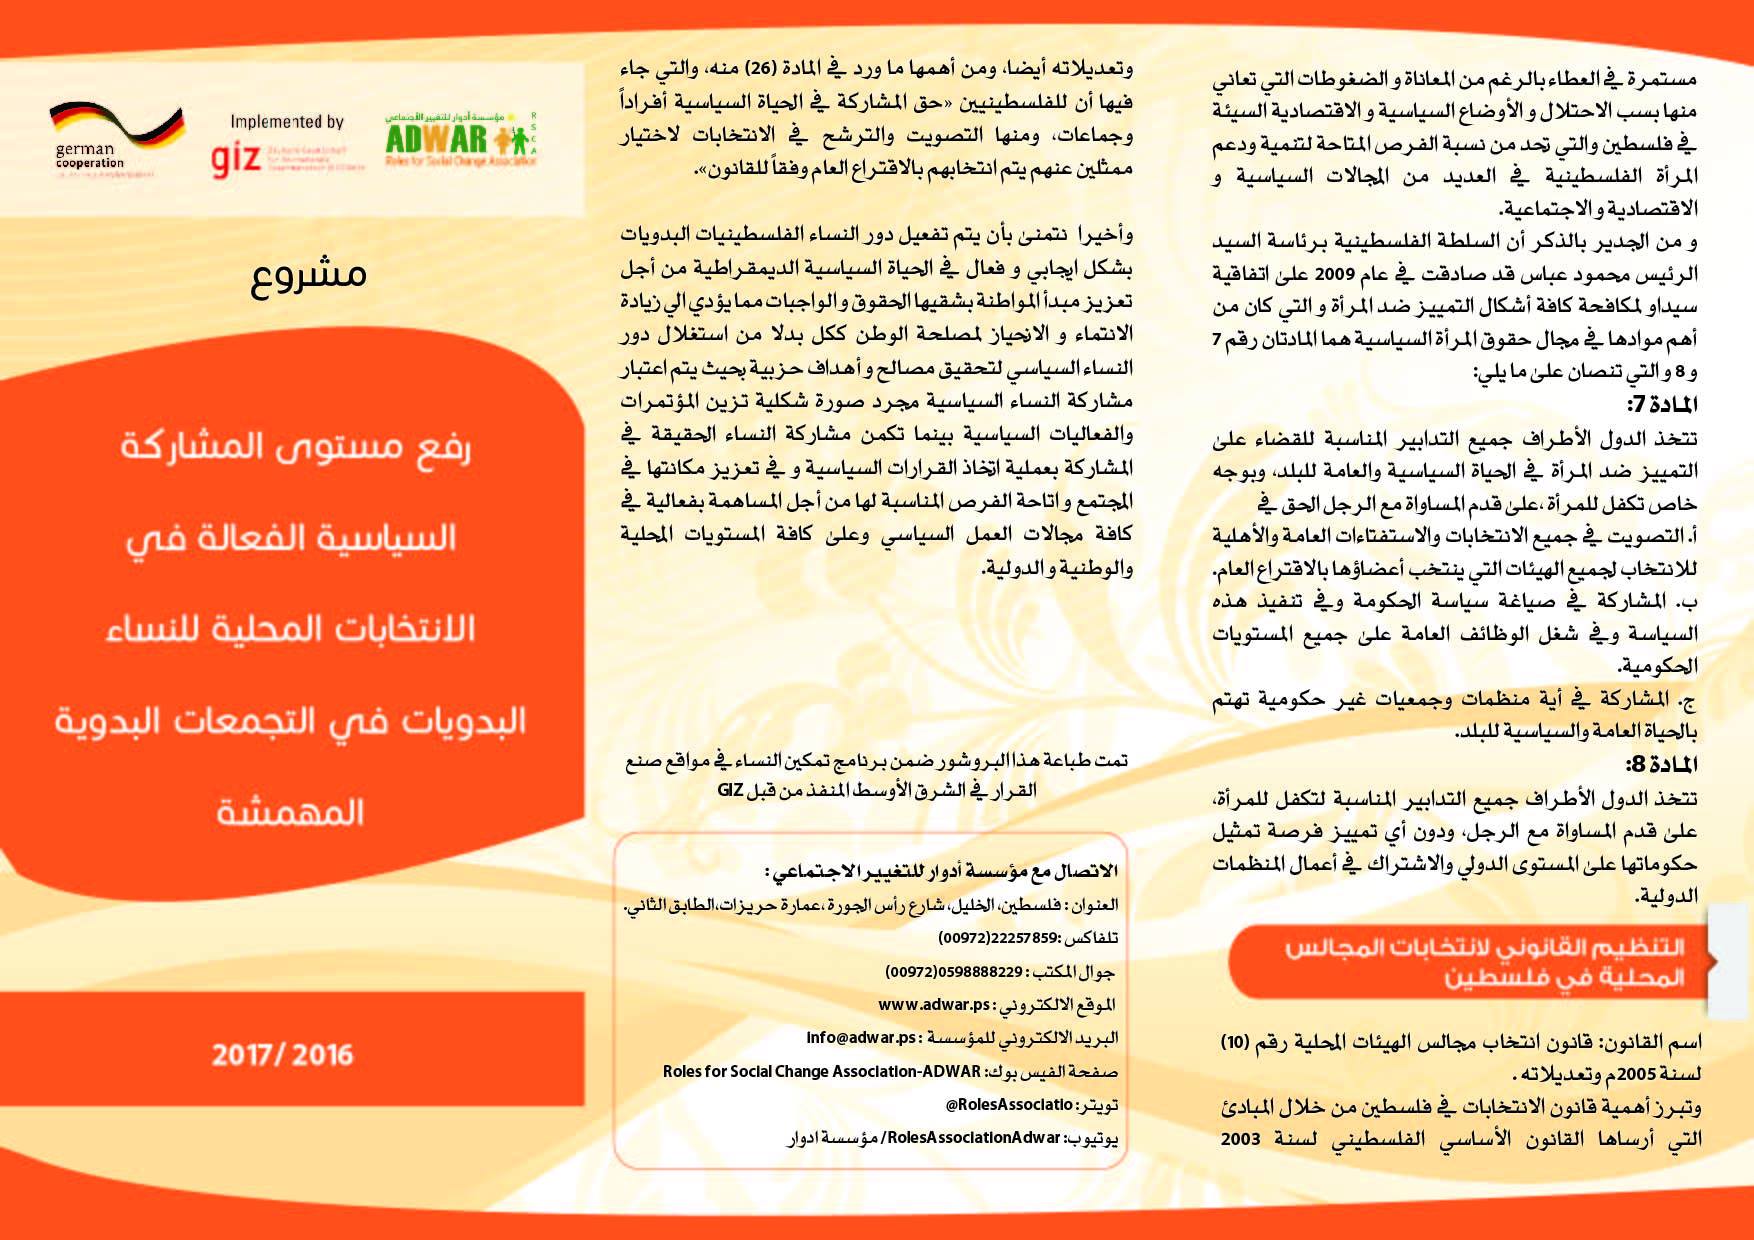  Brochure for the project (Increasing Women’s Political Participation Through Effective local election in Marginalized community.)